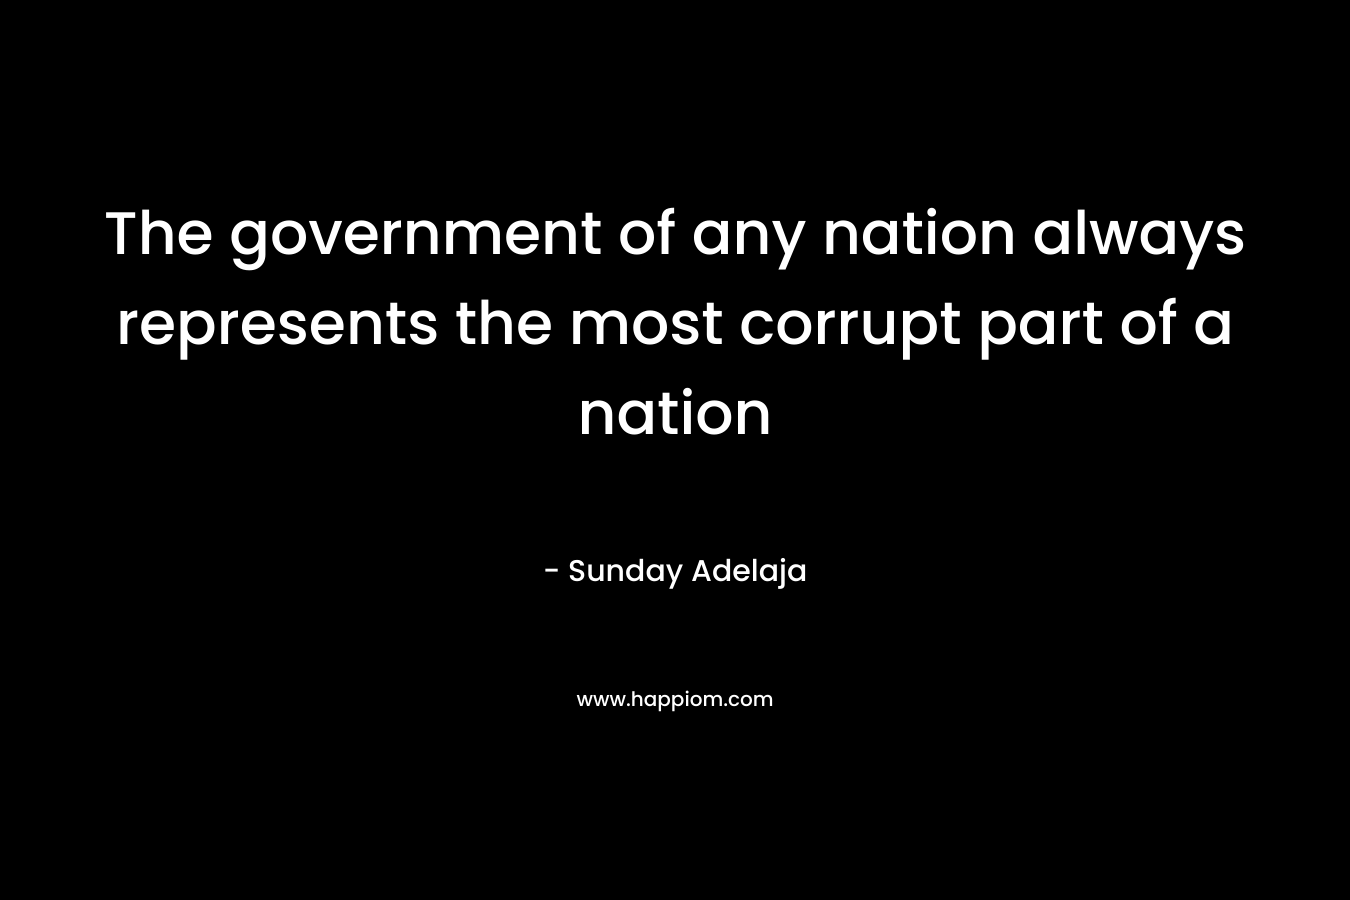 The government of any nation always represents the most corrupt part of a nation – Sunday Adelaja